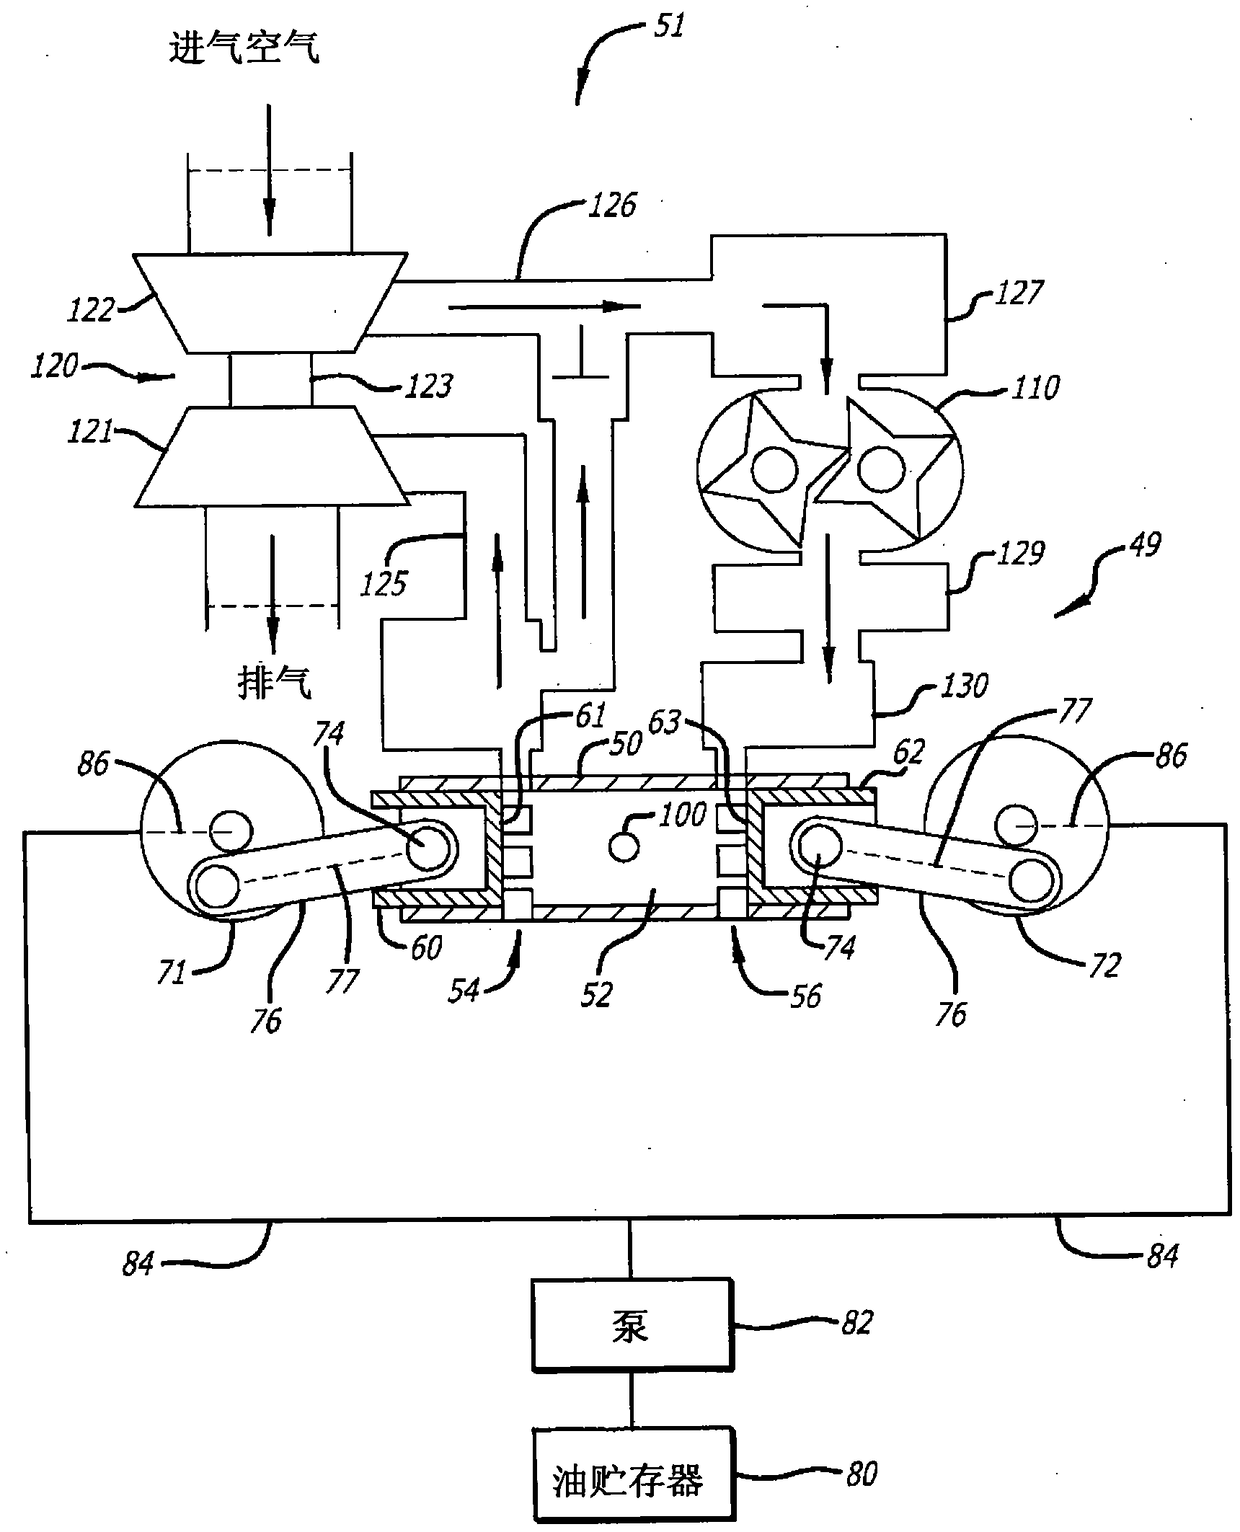 Lubrication arrangements for maintaining piston pin oil pressure in two-stroke cycle, opposed-piston engines